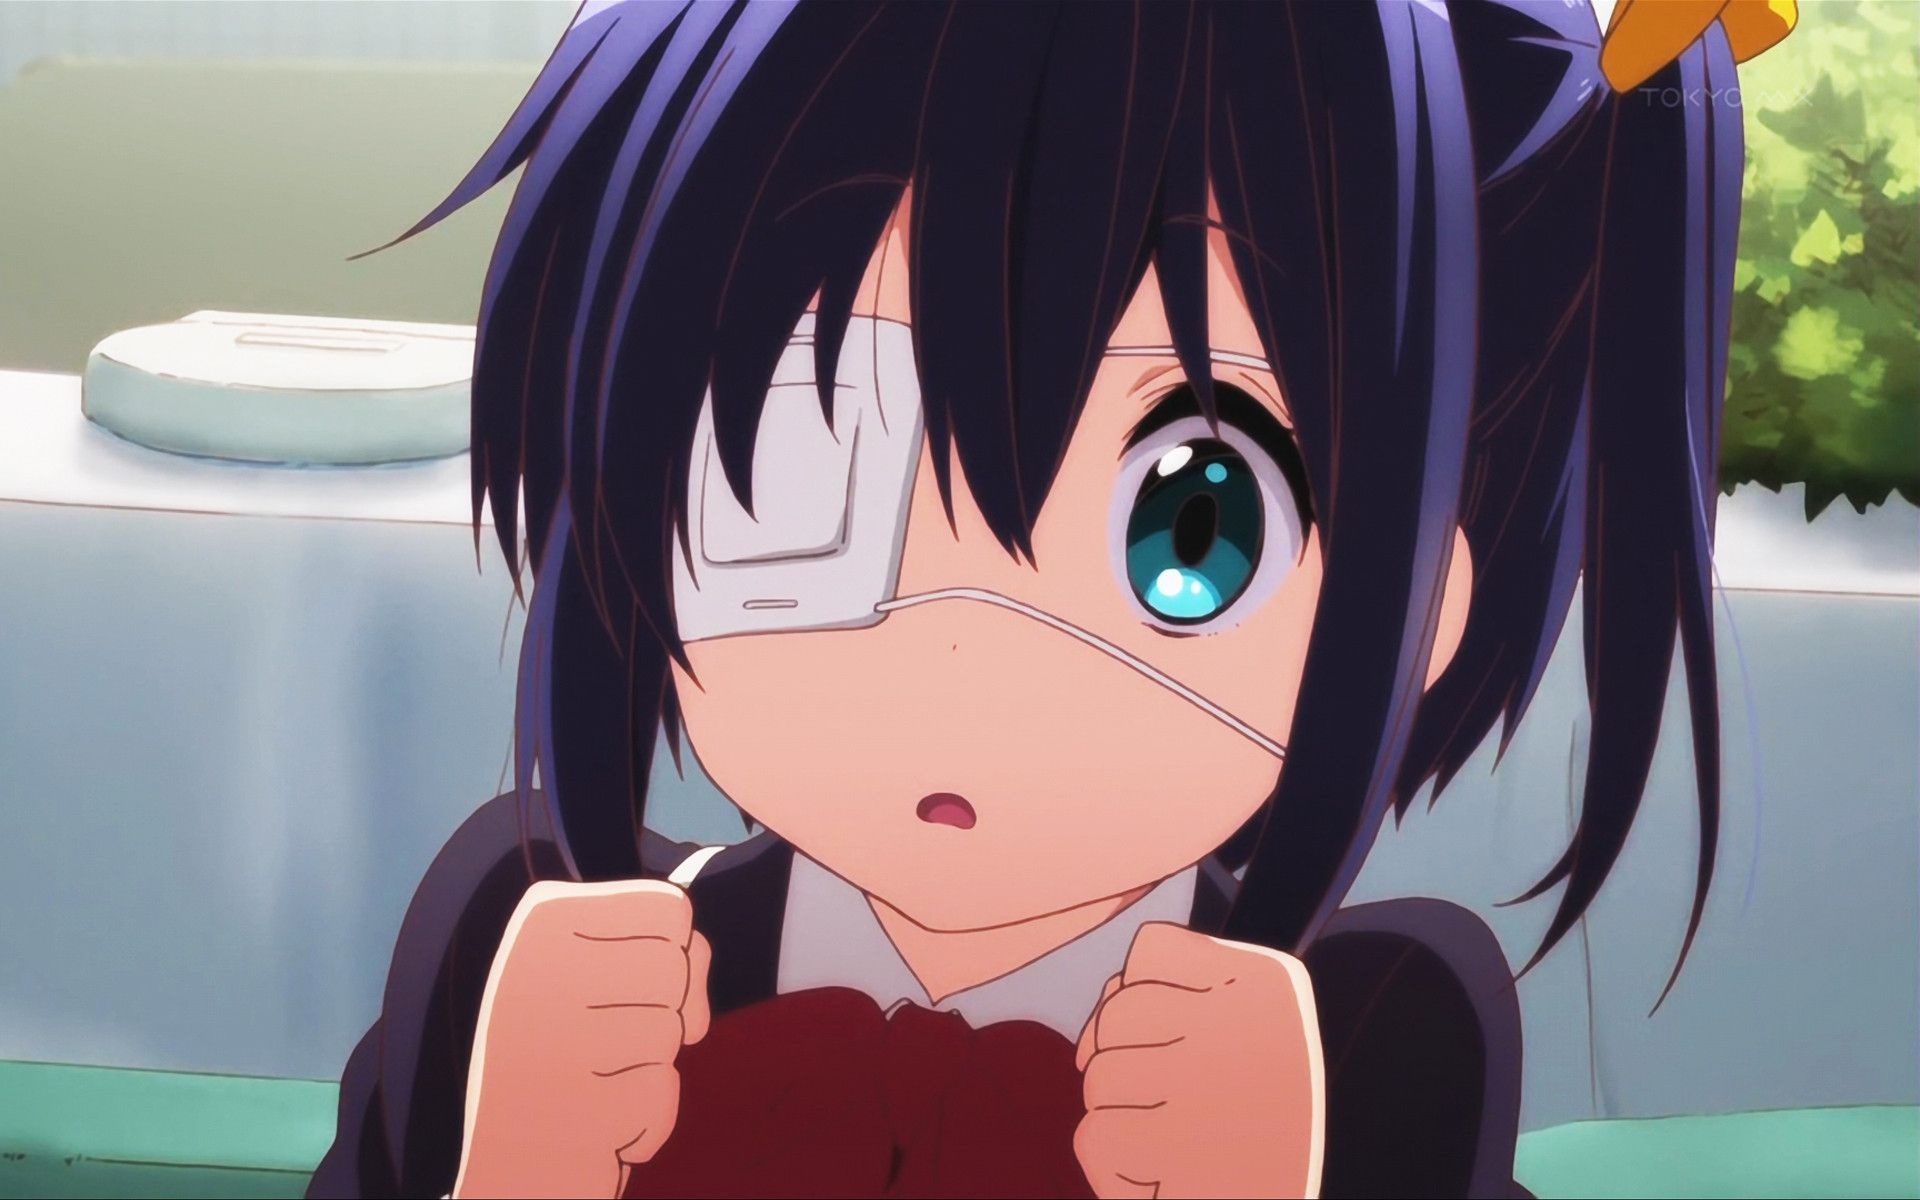 Love, Chunibyo and Other Delusions, Rikka wallpaper, Anime girl, Mysterious charm, 1920x1200 HD Desktop